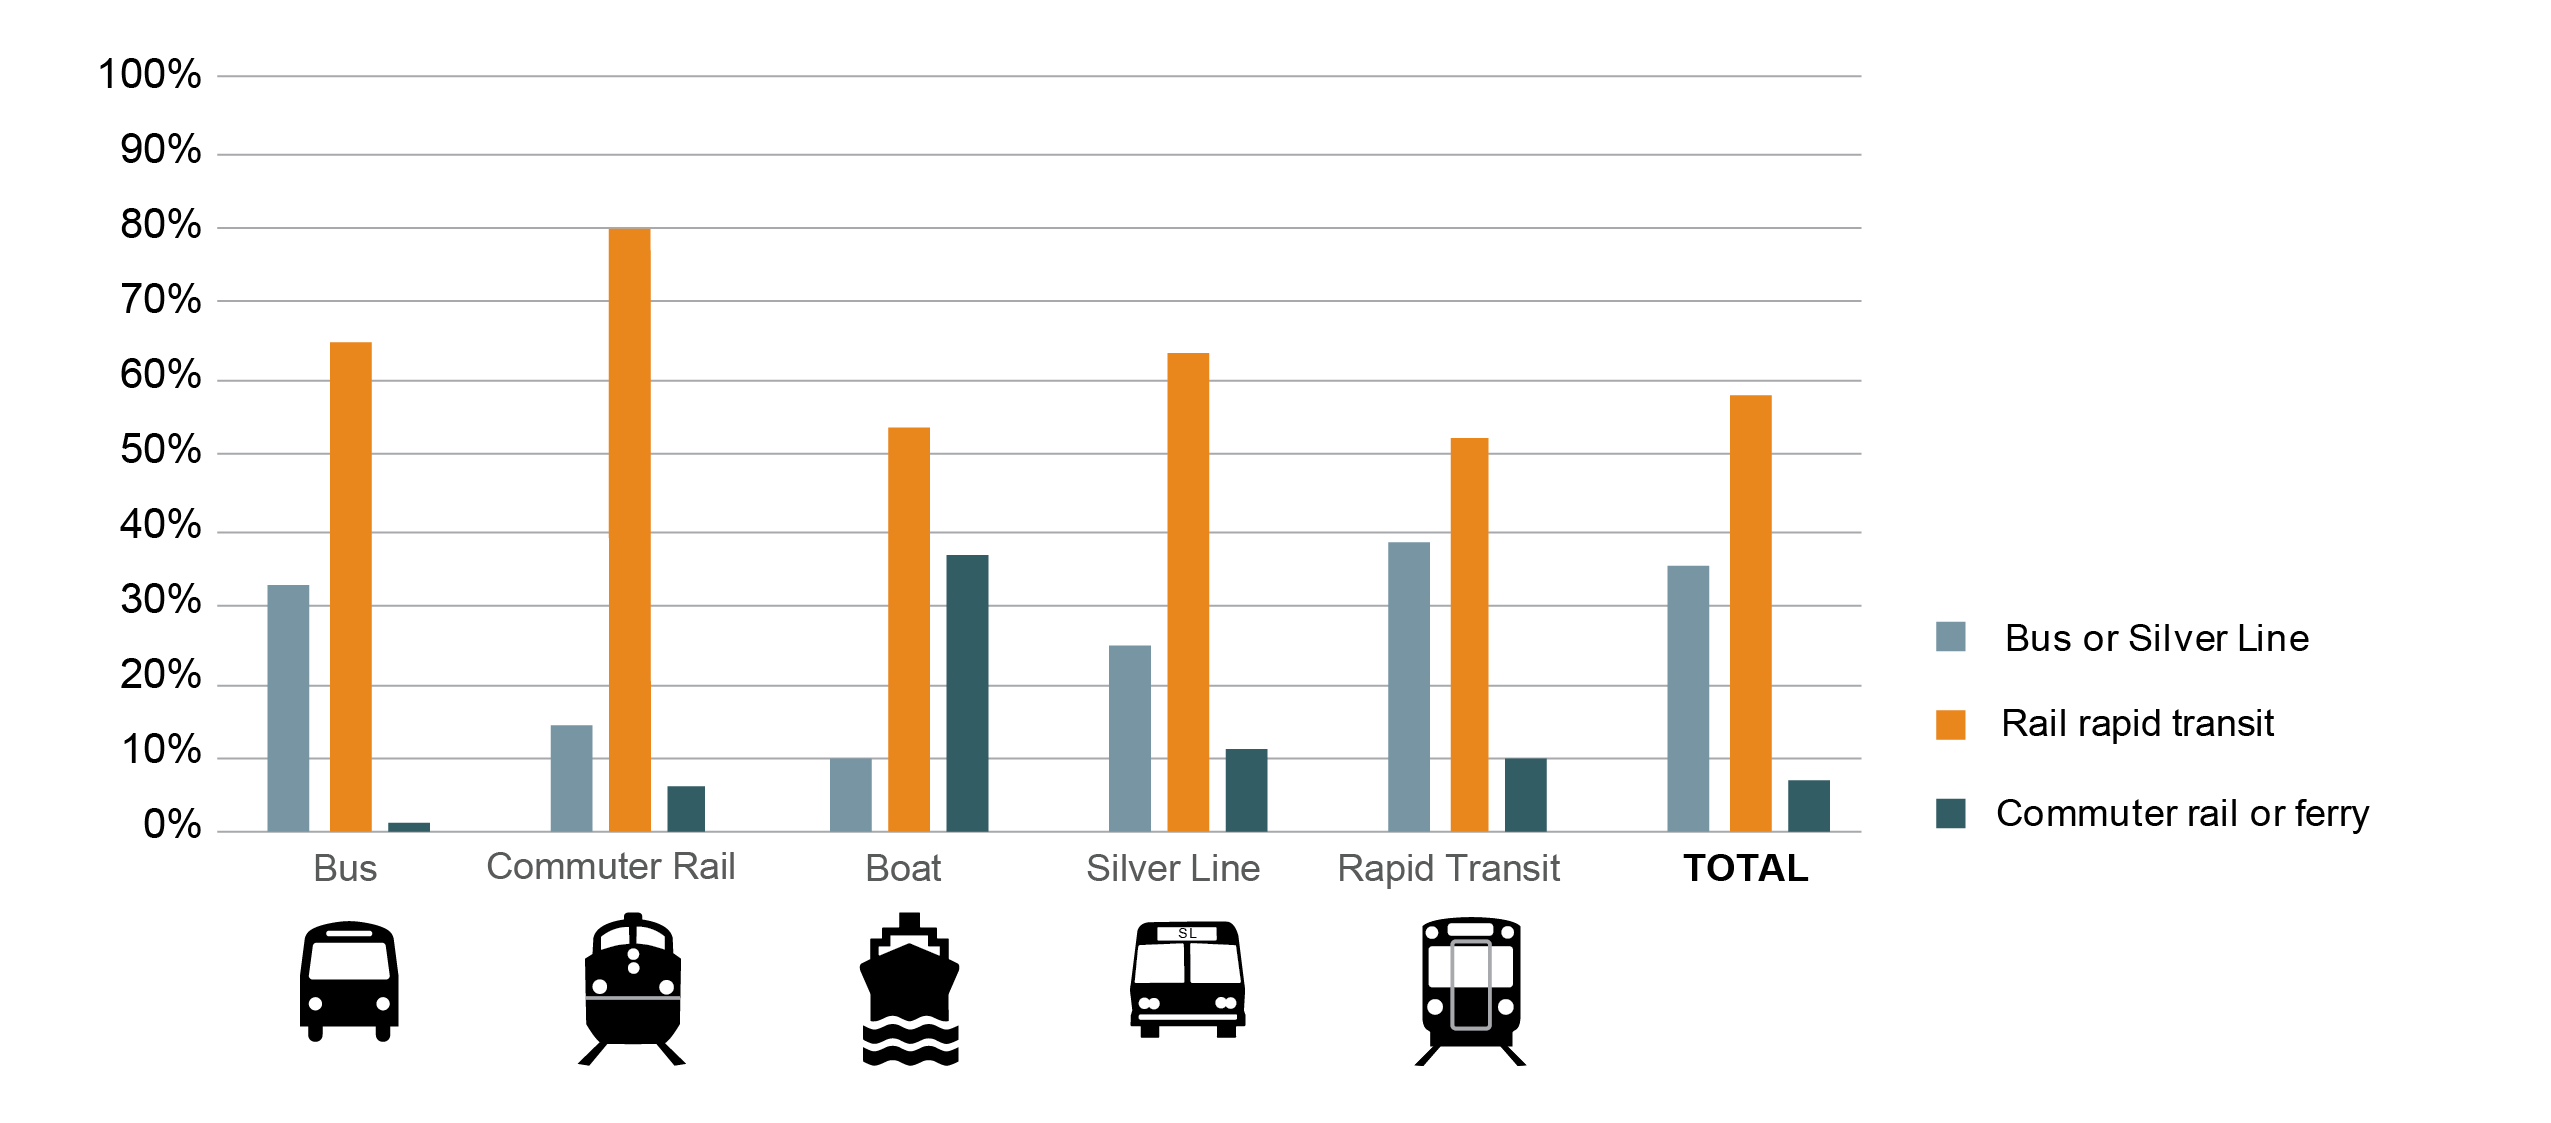 Figure 8 is a series of bar graphs showing the percentage distributions of use of MBTA service modes for transfer access to or egress from other MBTA service modes, as reported in the 2015-17 survey. 